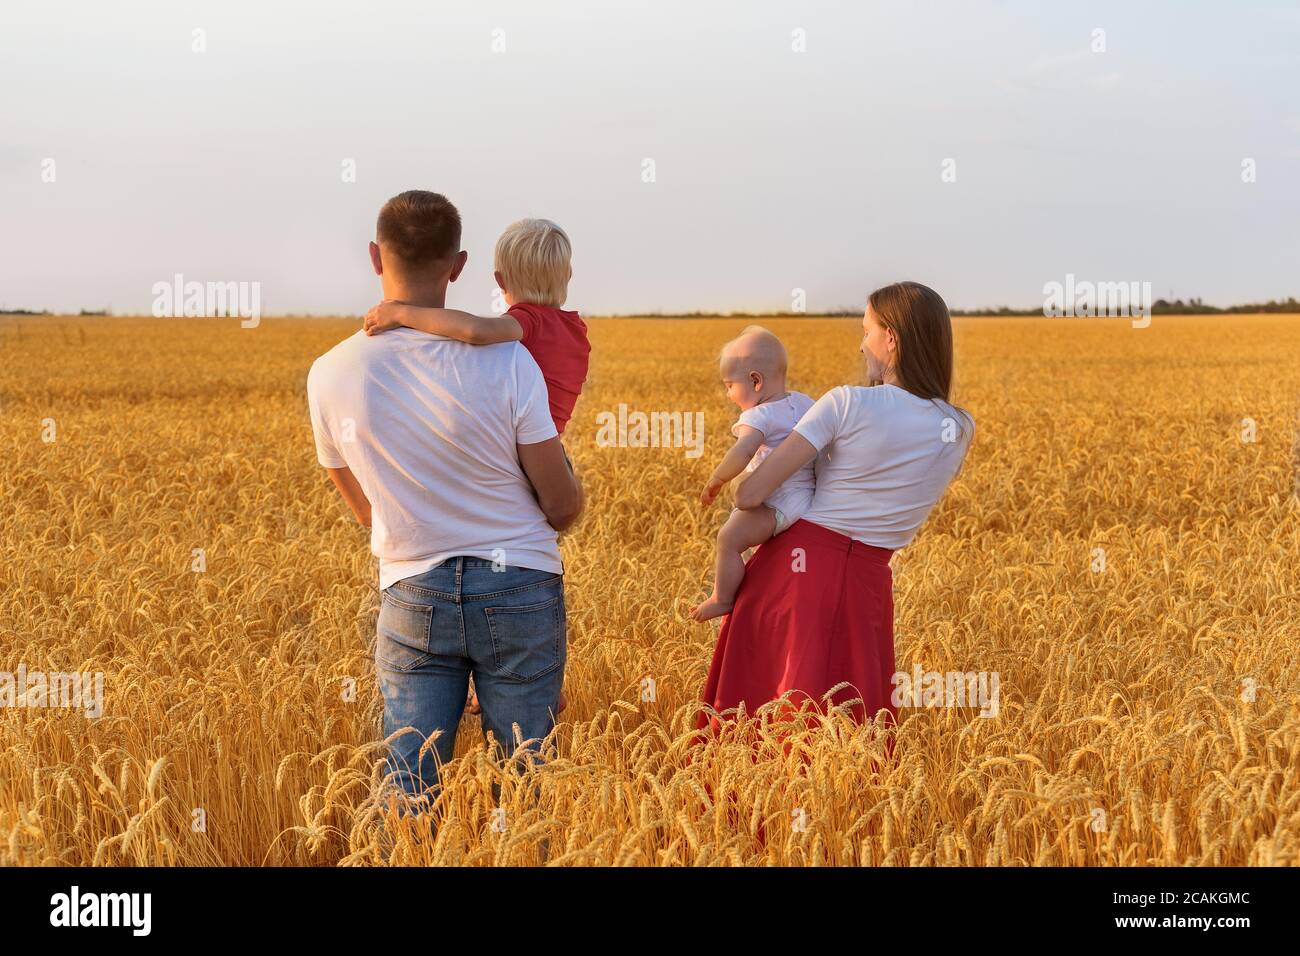 Rear view of father mother and two children in wheat field. Young family with children outdoors. Stock Photo